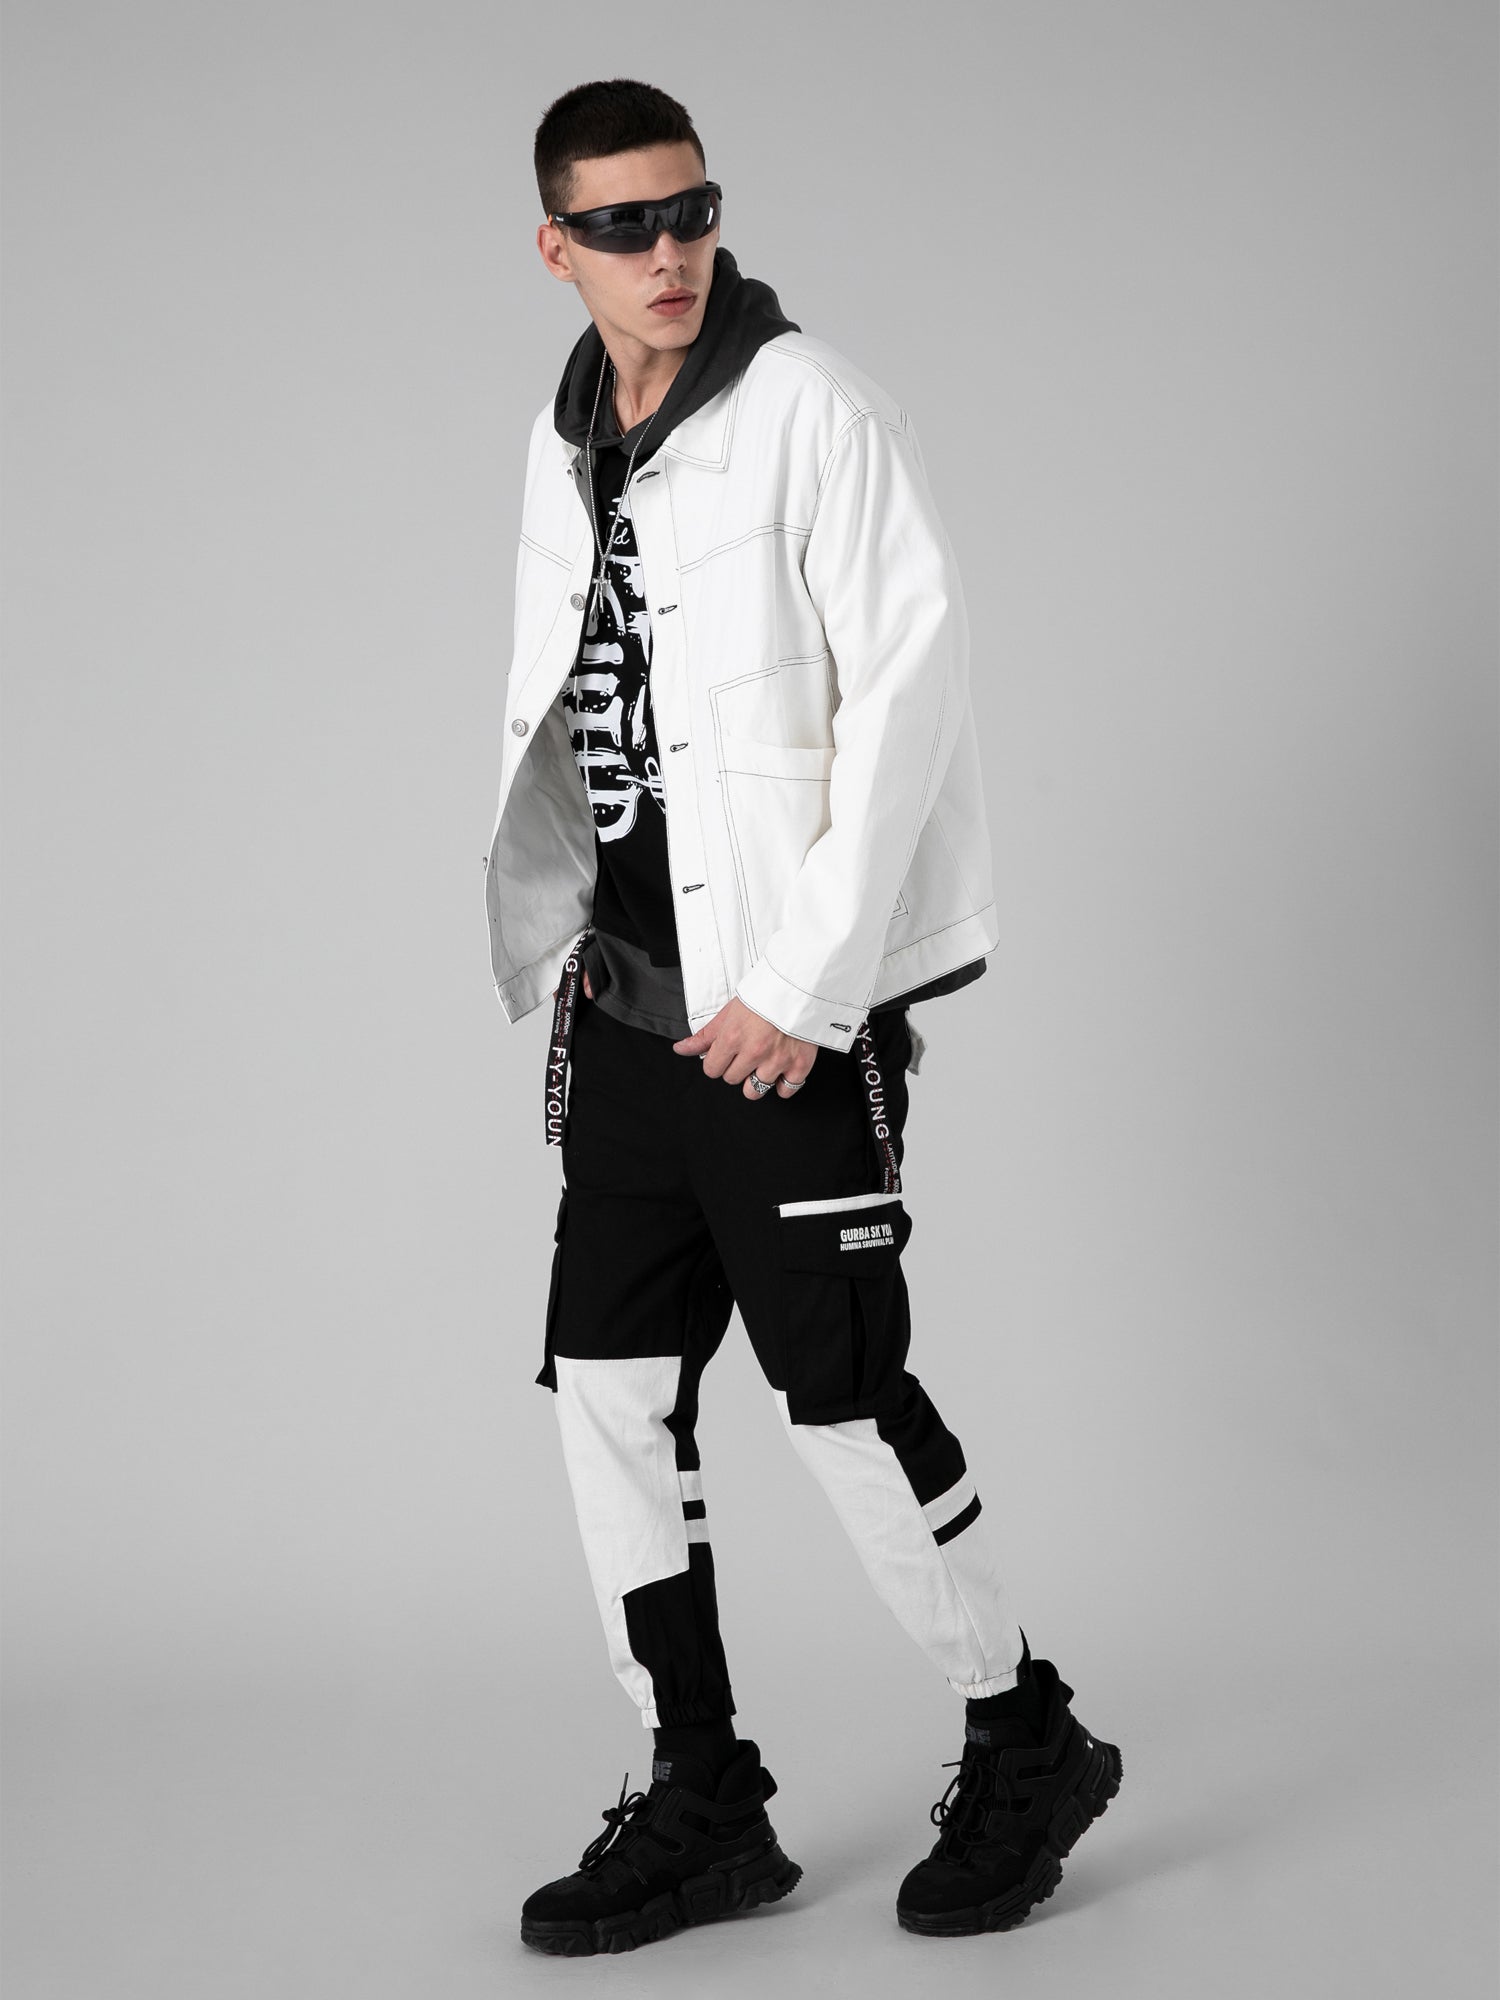 JUSTNOTAG Drawstring overalls men's trendy brand ins function loose pants